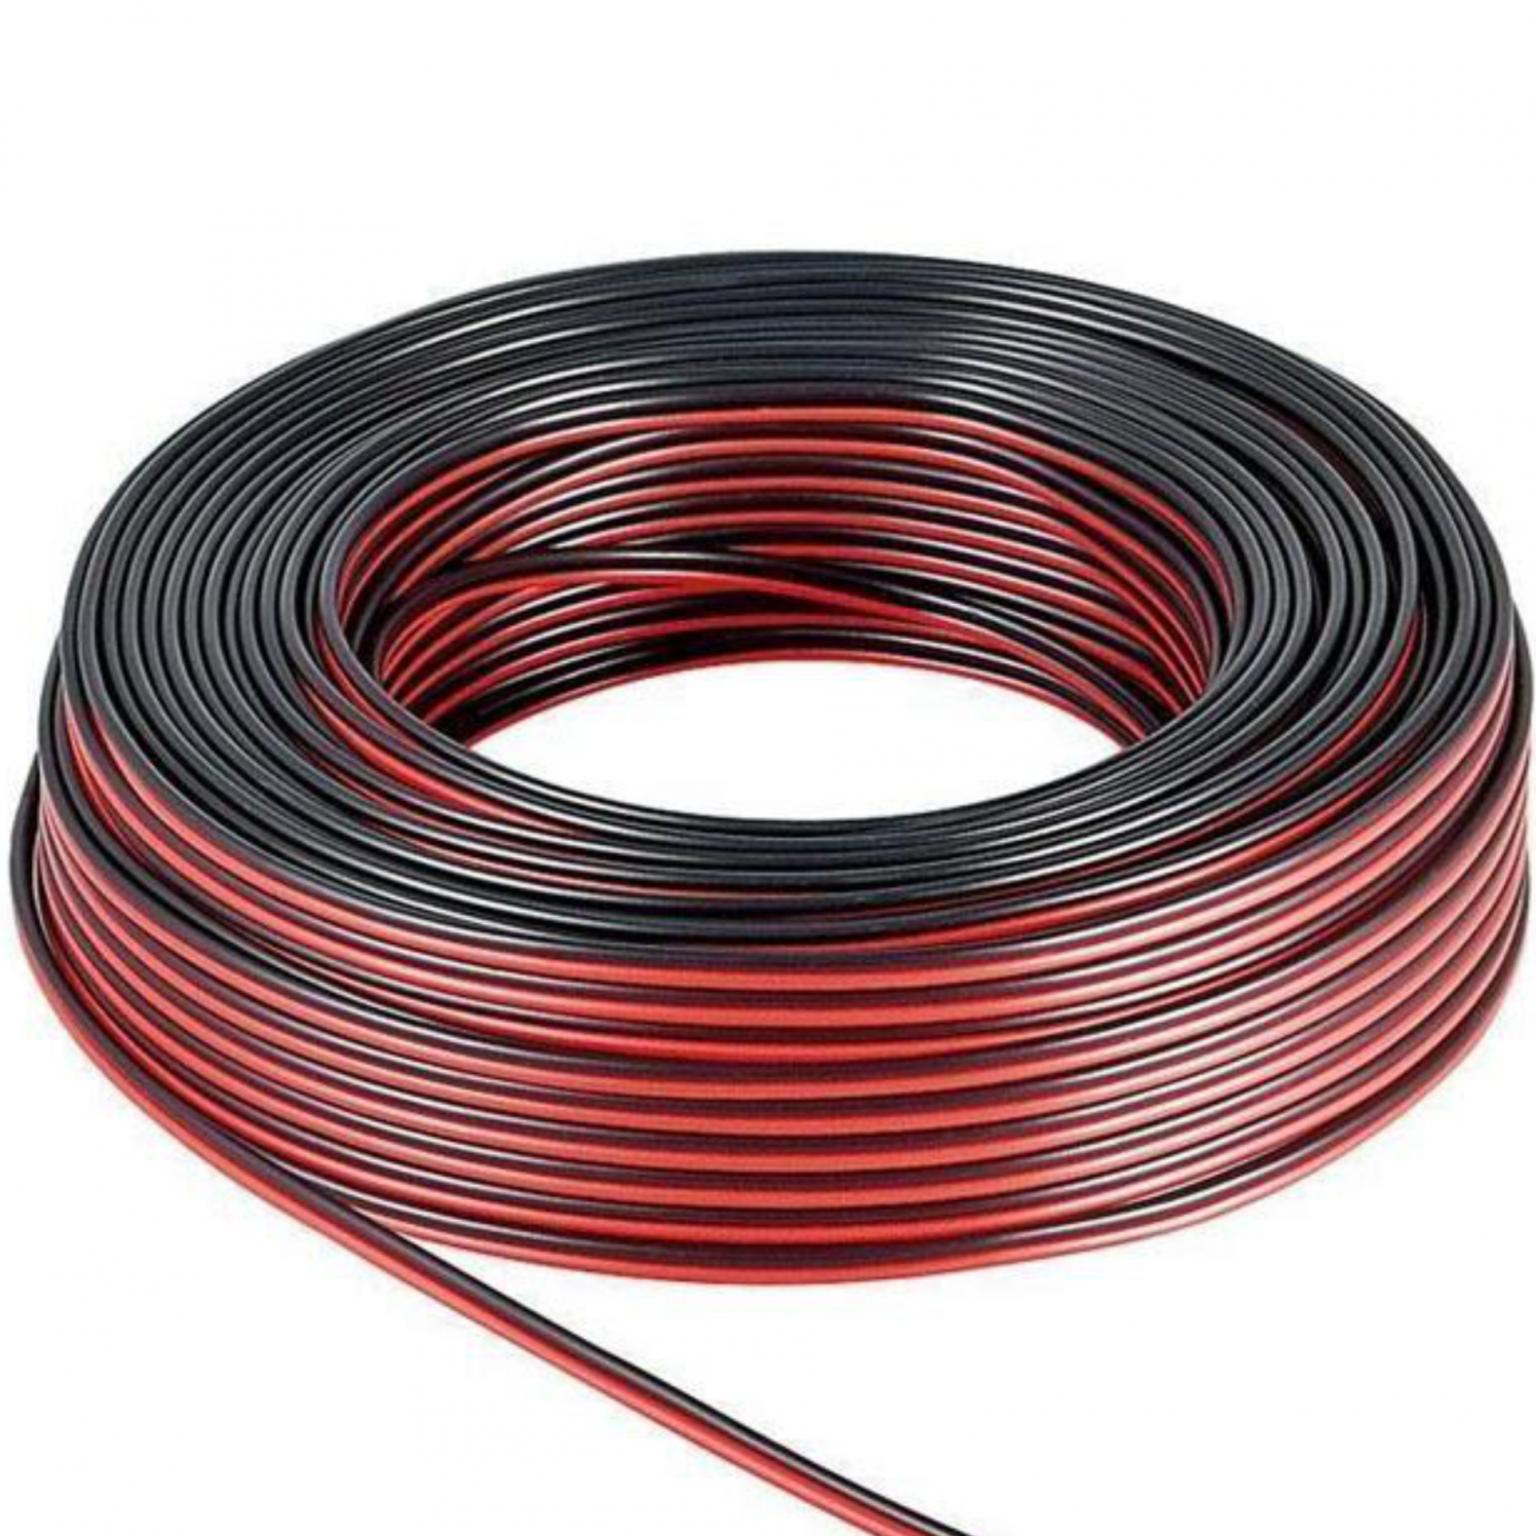 Image of Speaker cable red/black 25 m roll, cable diameter 2 x 1,5 mm? - Goobay